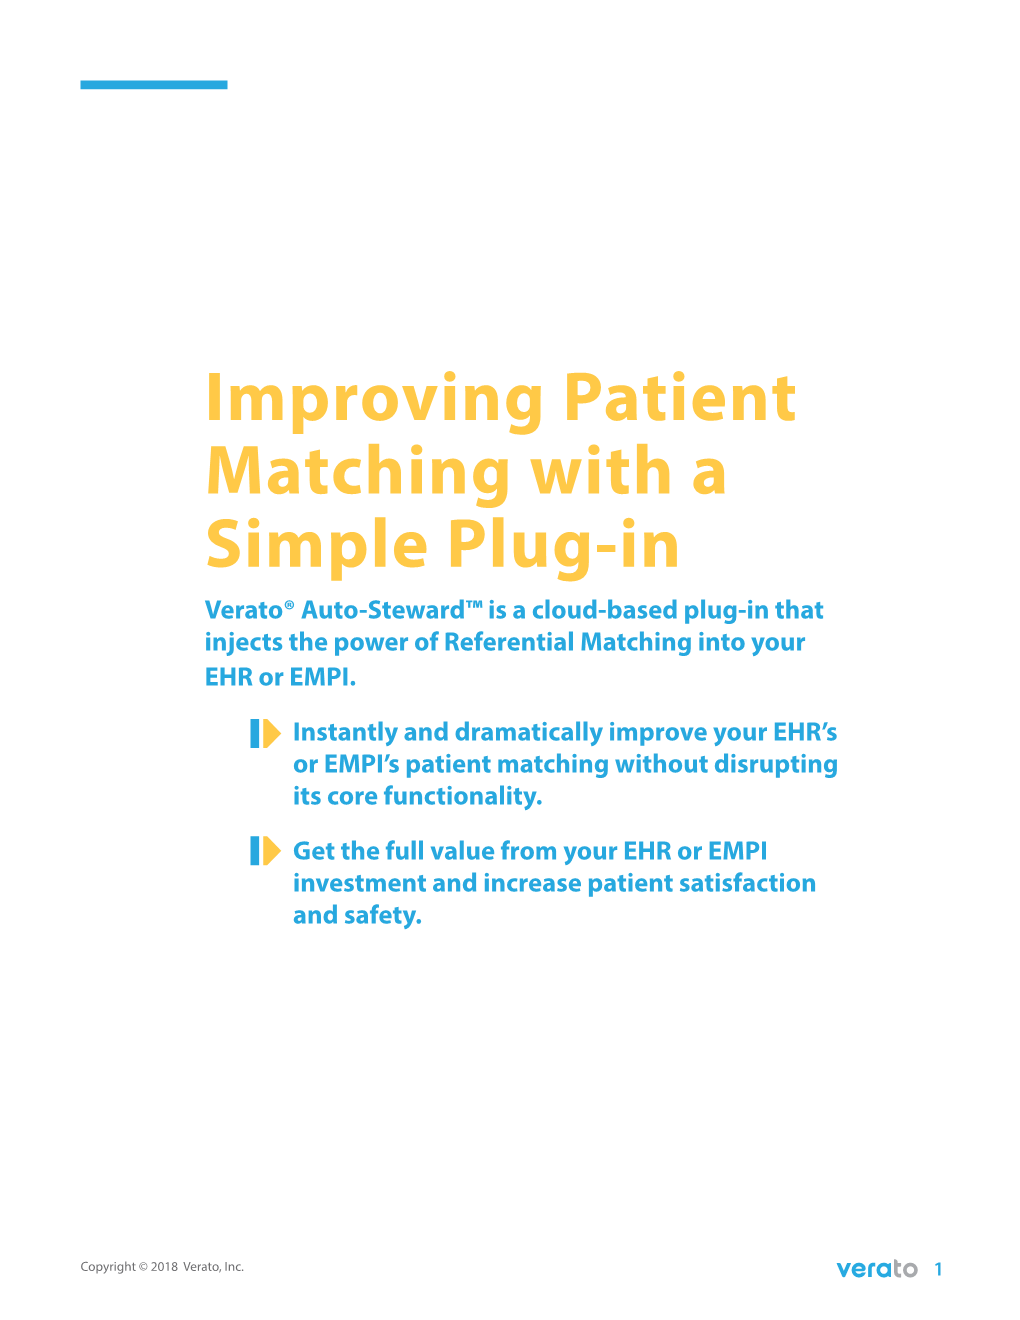 Improving Patient Matching with a Simple Plug-In Verato® Auto-Steward™ Is a Cloud-Based Plug-In That Injects the Power of Referential Matching Into Your EHR Or EMPI